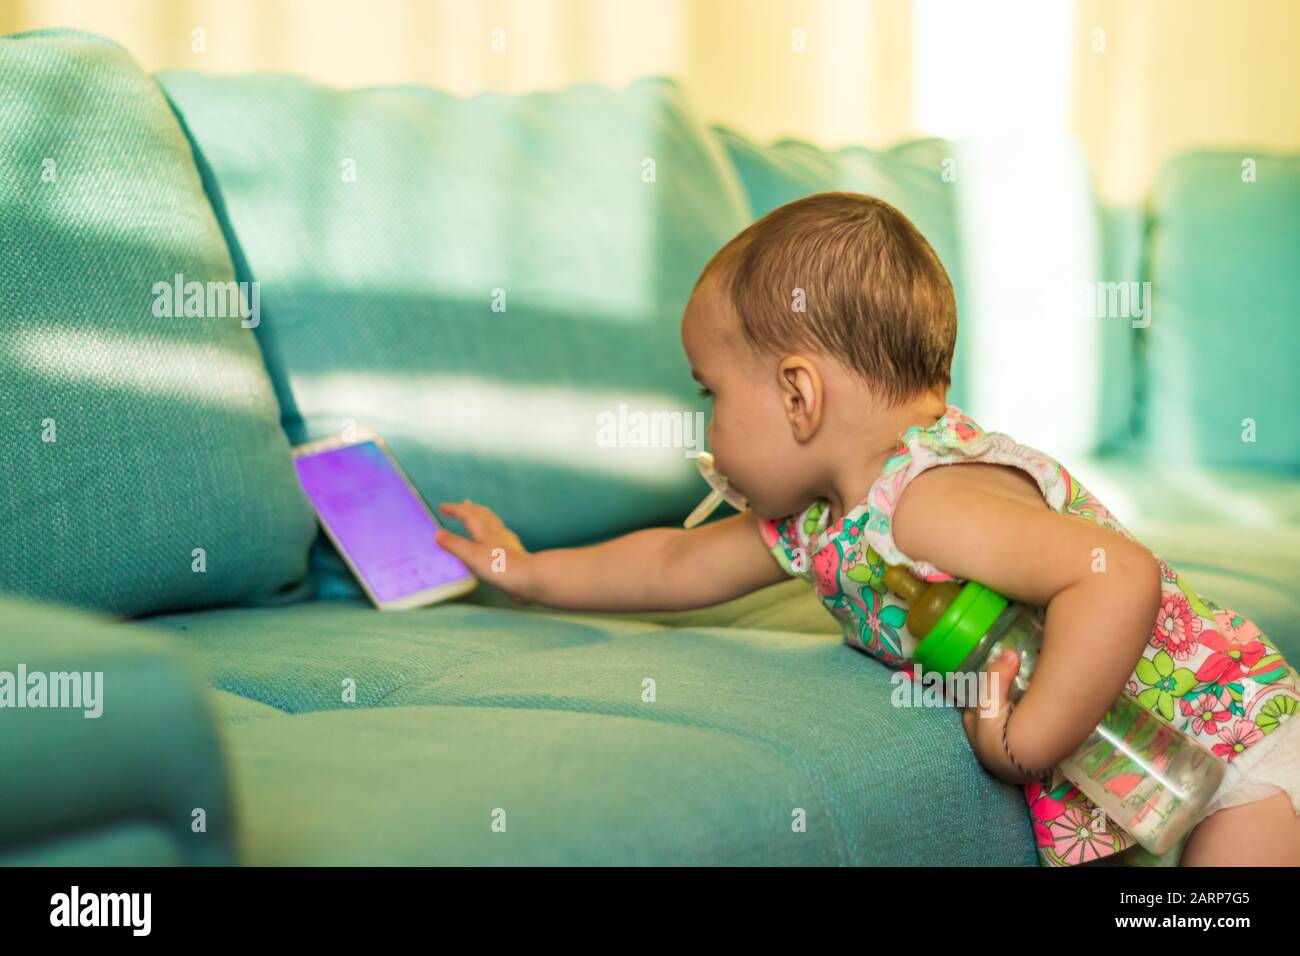 A cute little girl reaching to grab the smartphone from the sofa on a bright sunny day at home. Stock Photo